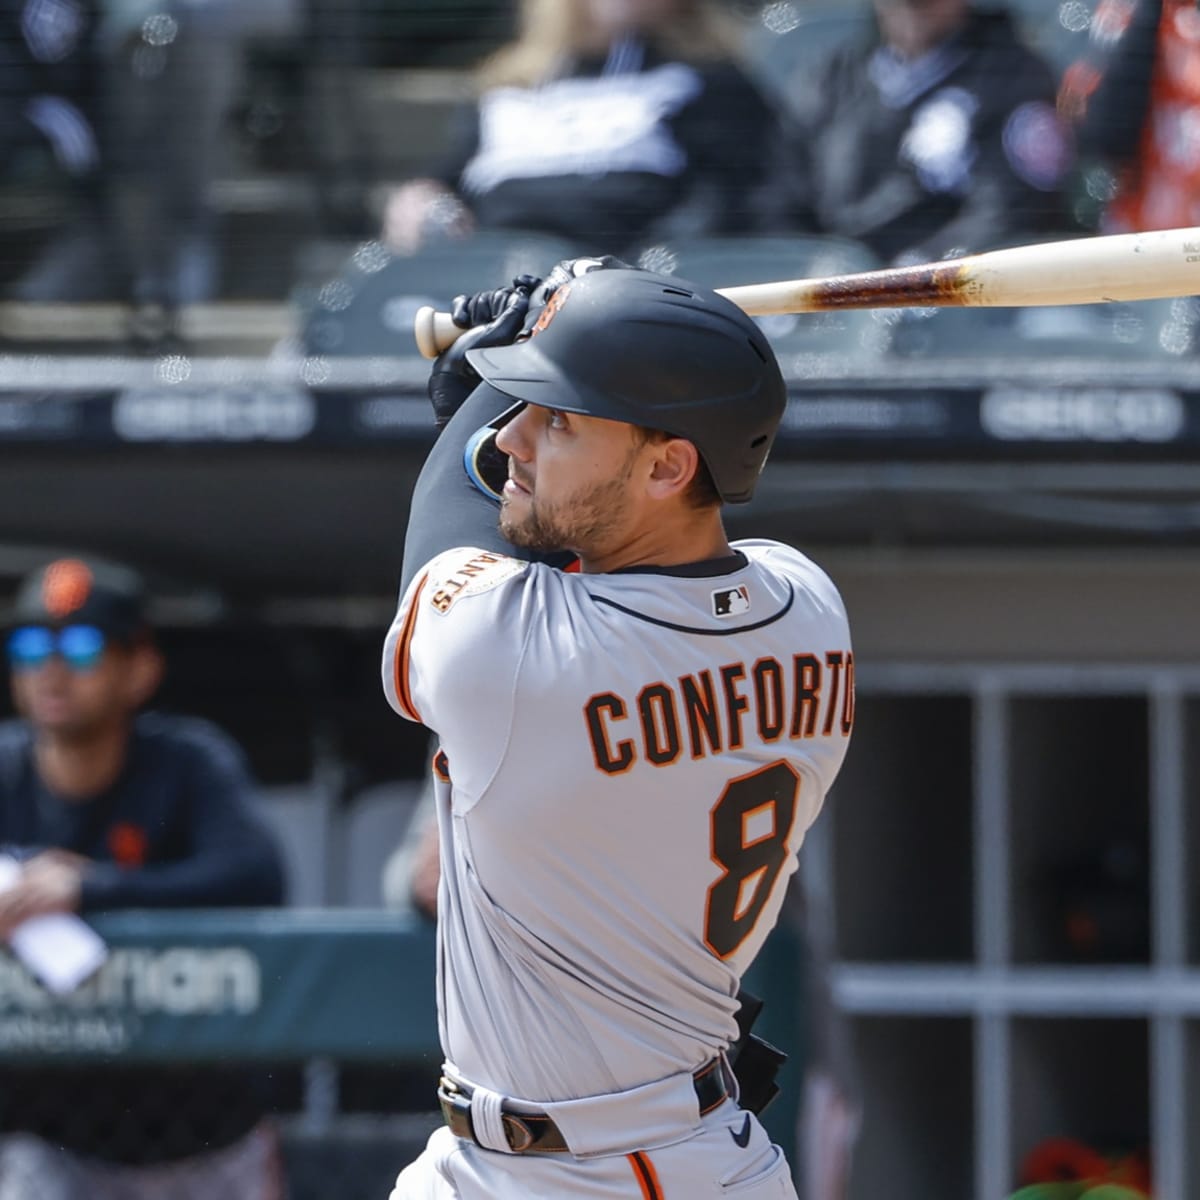 Michael Conforto day-to-day after suffering heel injury in loss